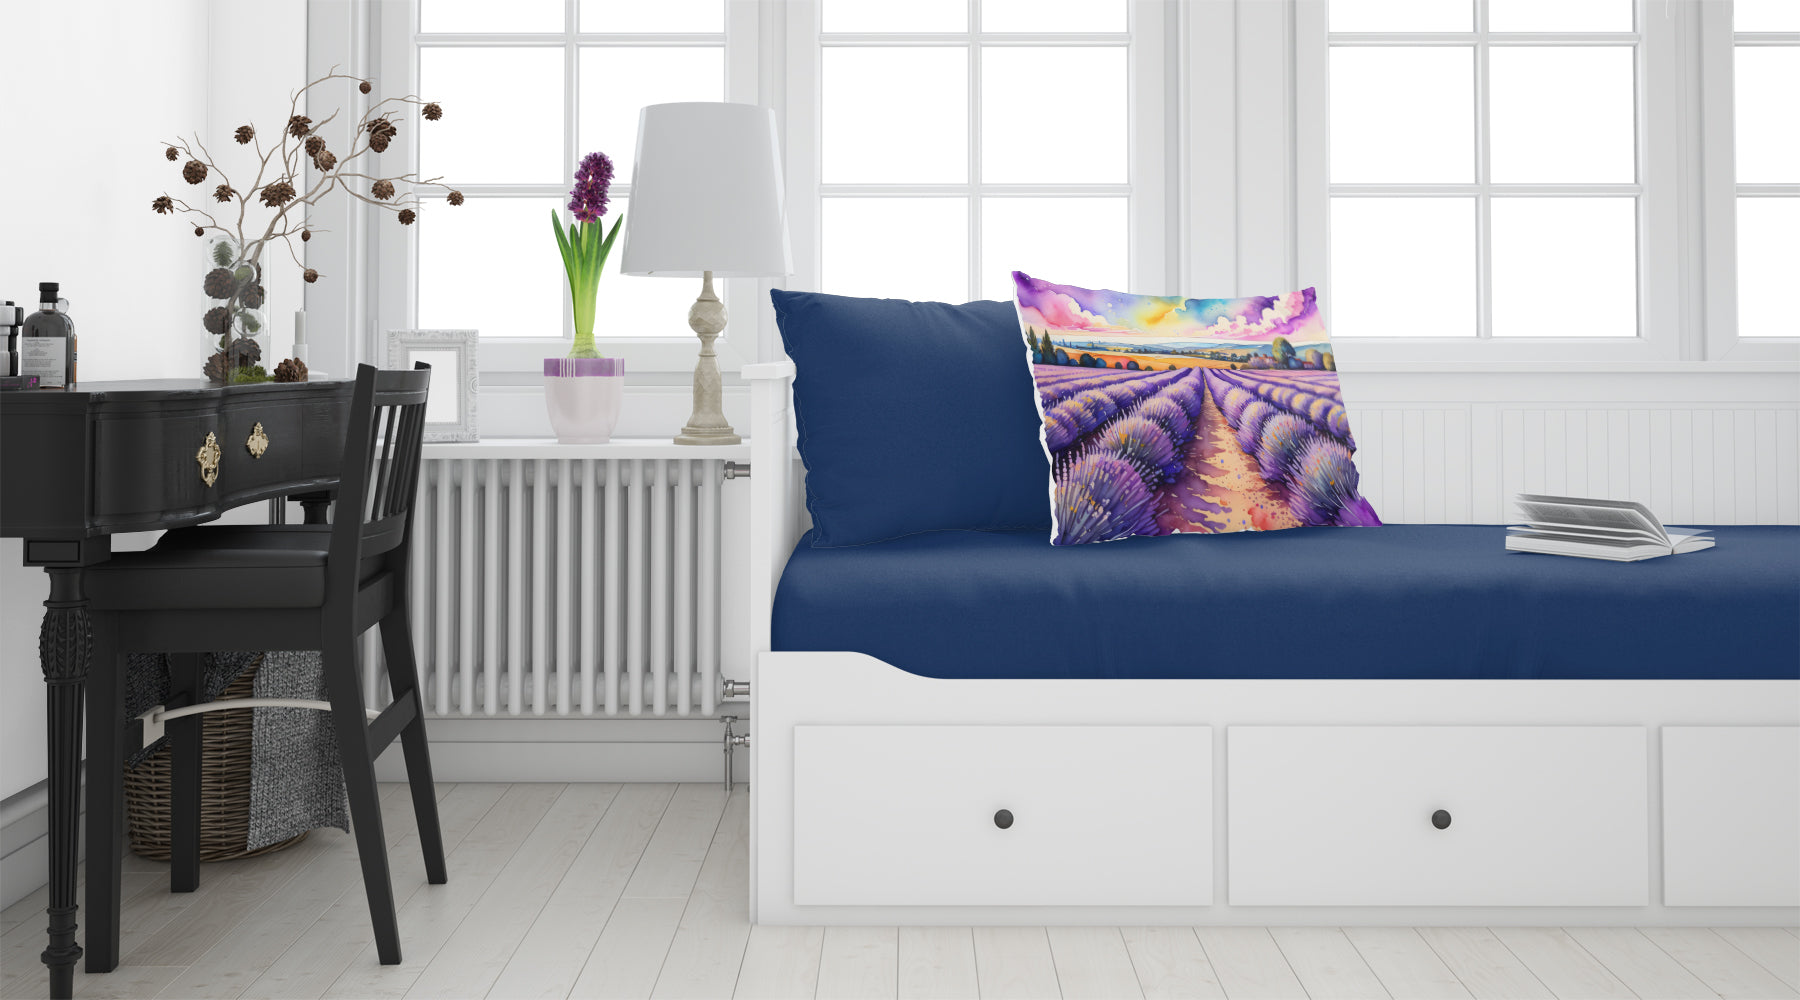 Buy this English Lavender in Color Fabric Standard Pillowcase